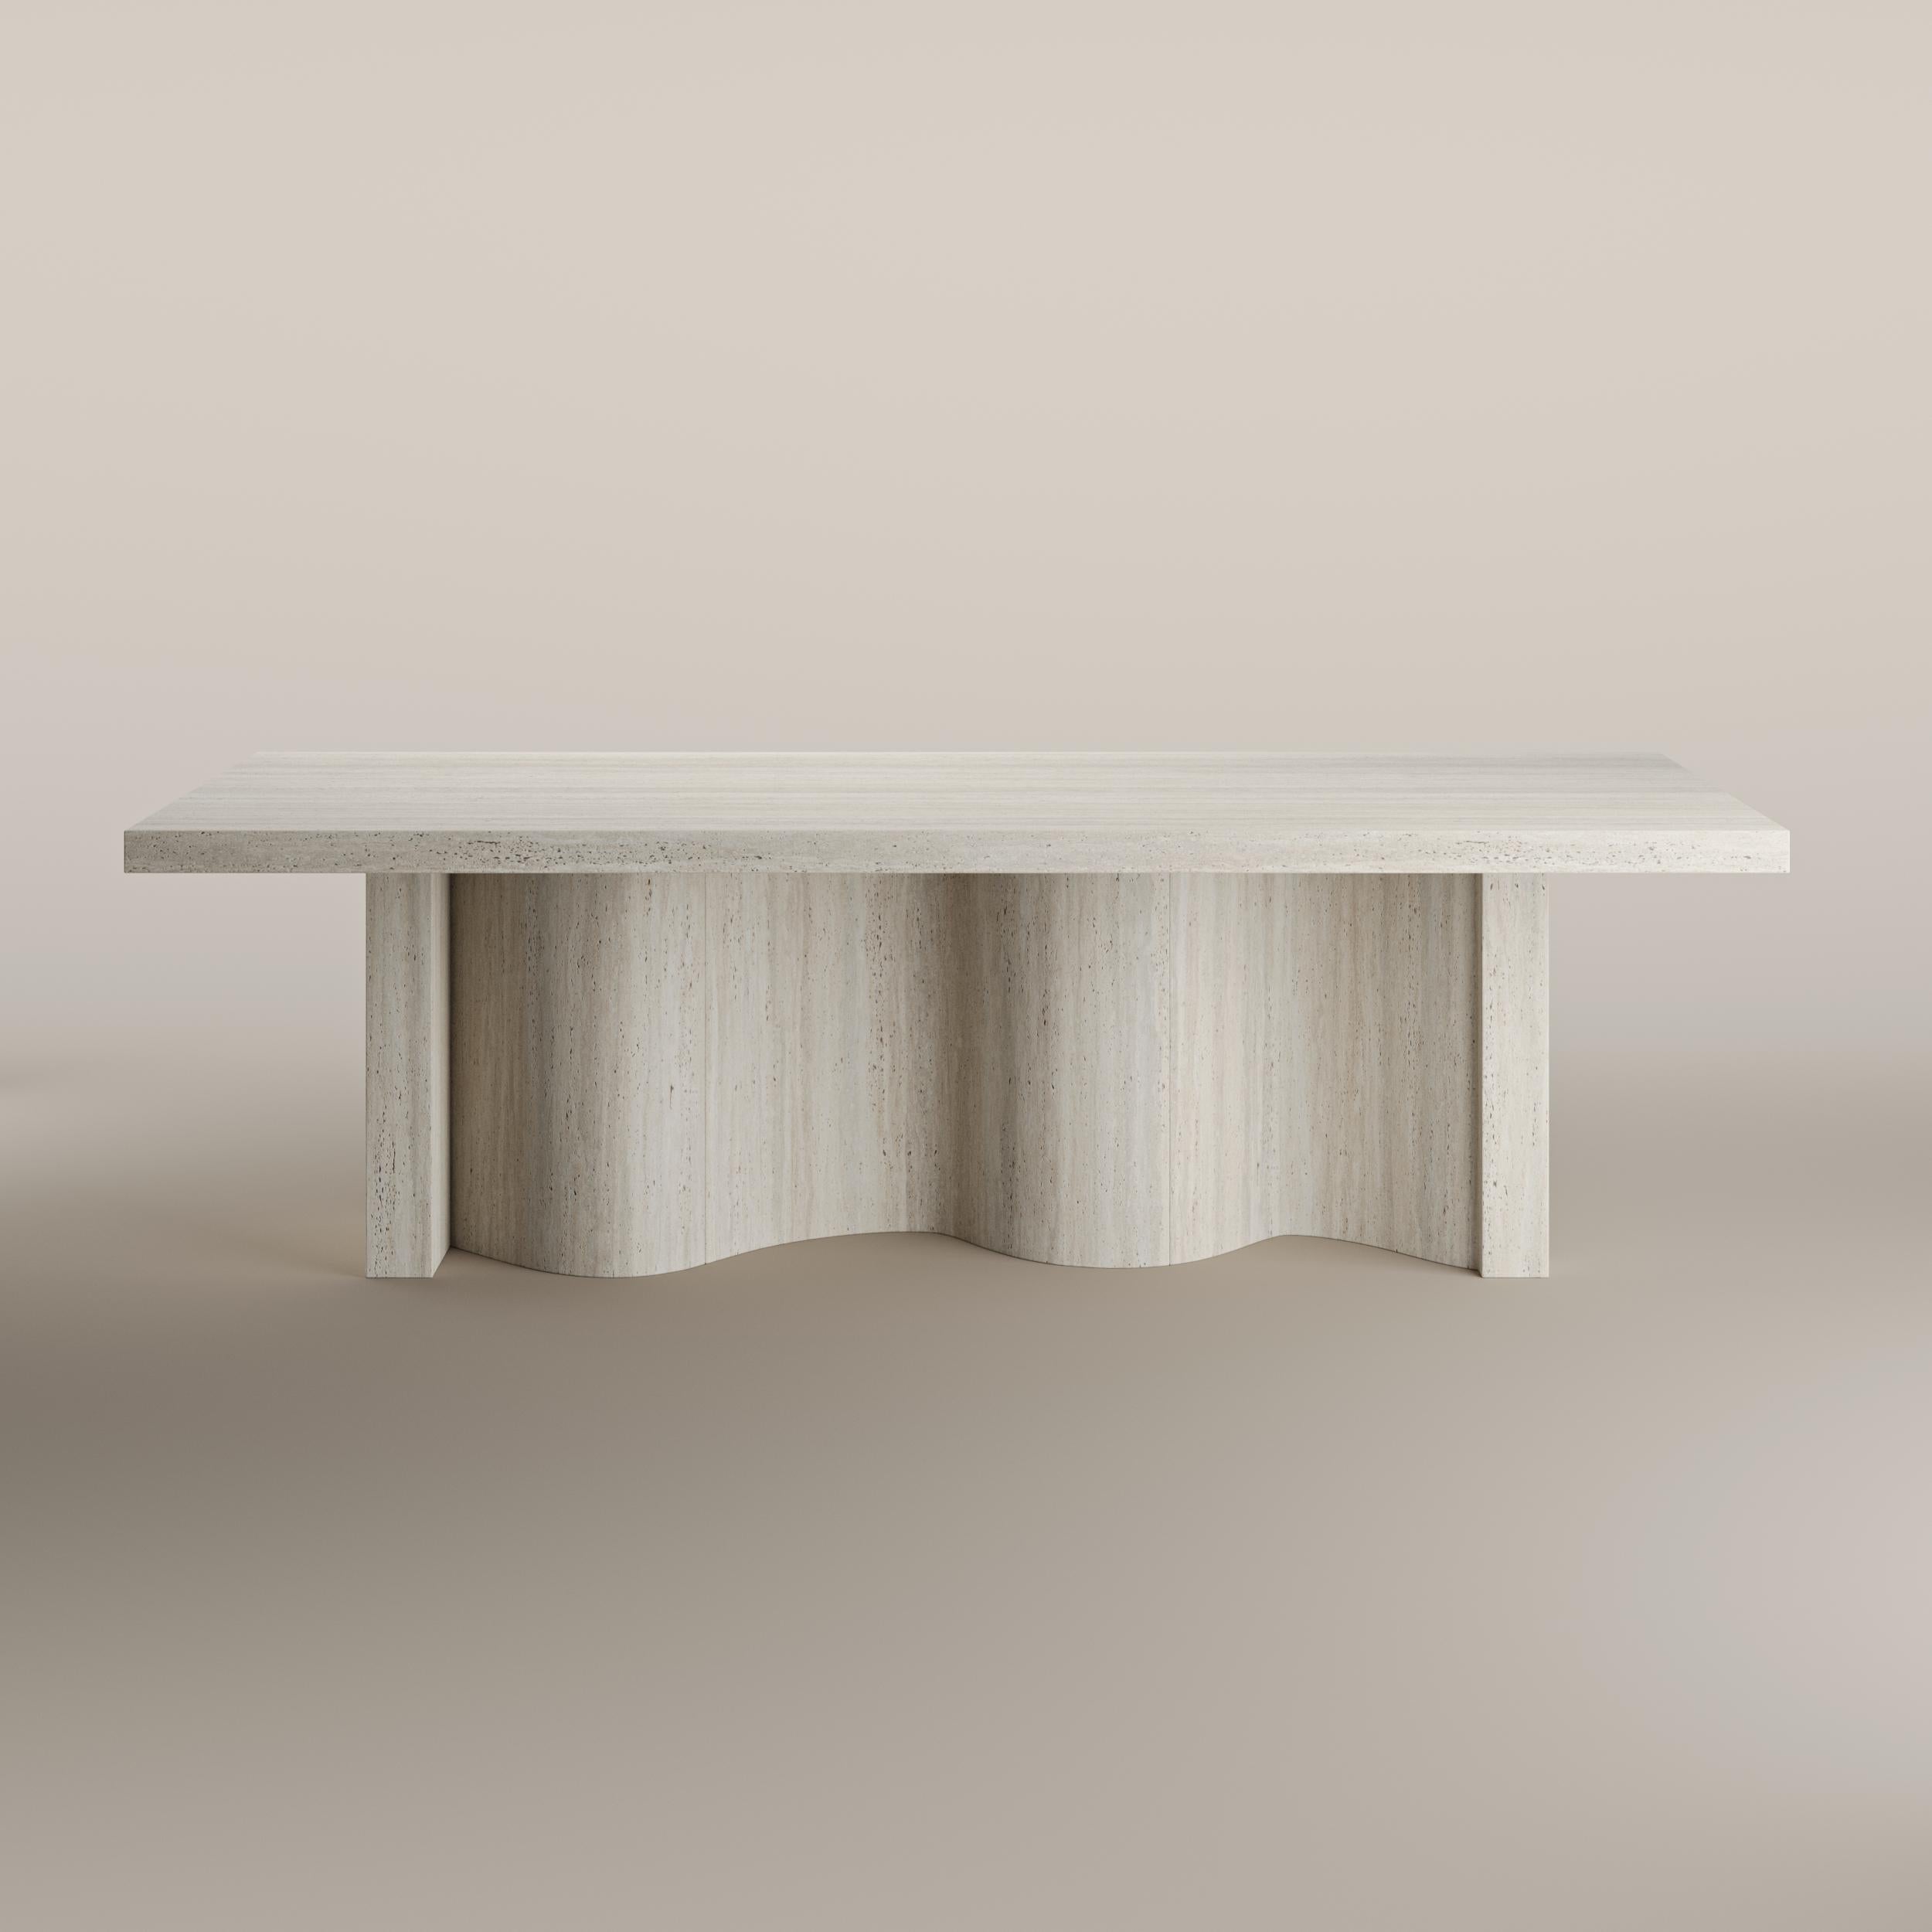 Scandinavian Modern Cadence Travertine Dining Table by T. Woon For Sale